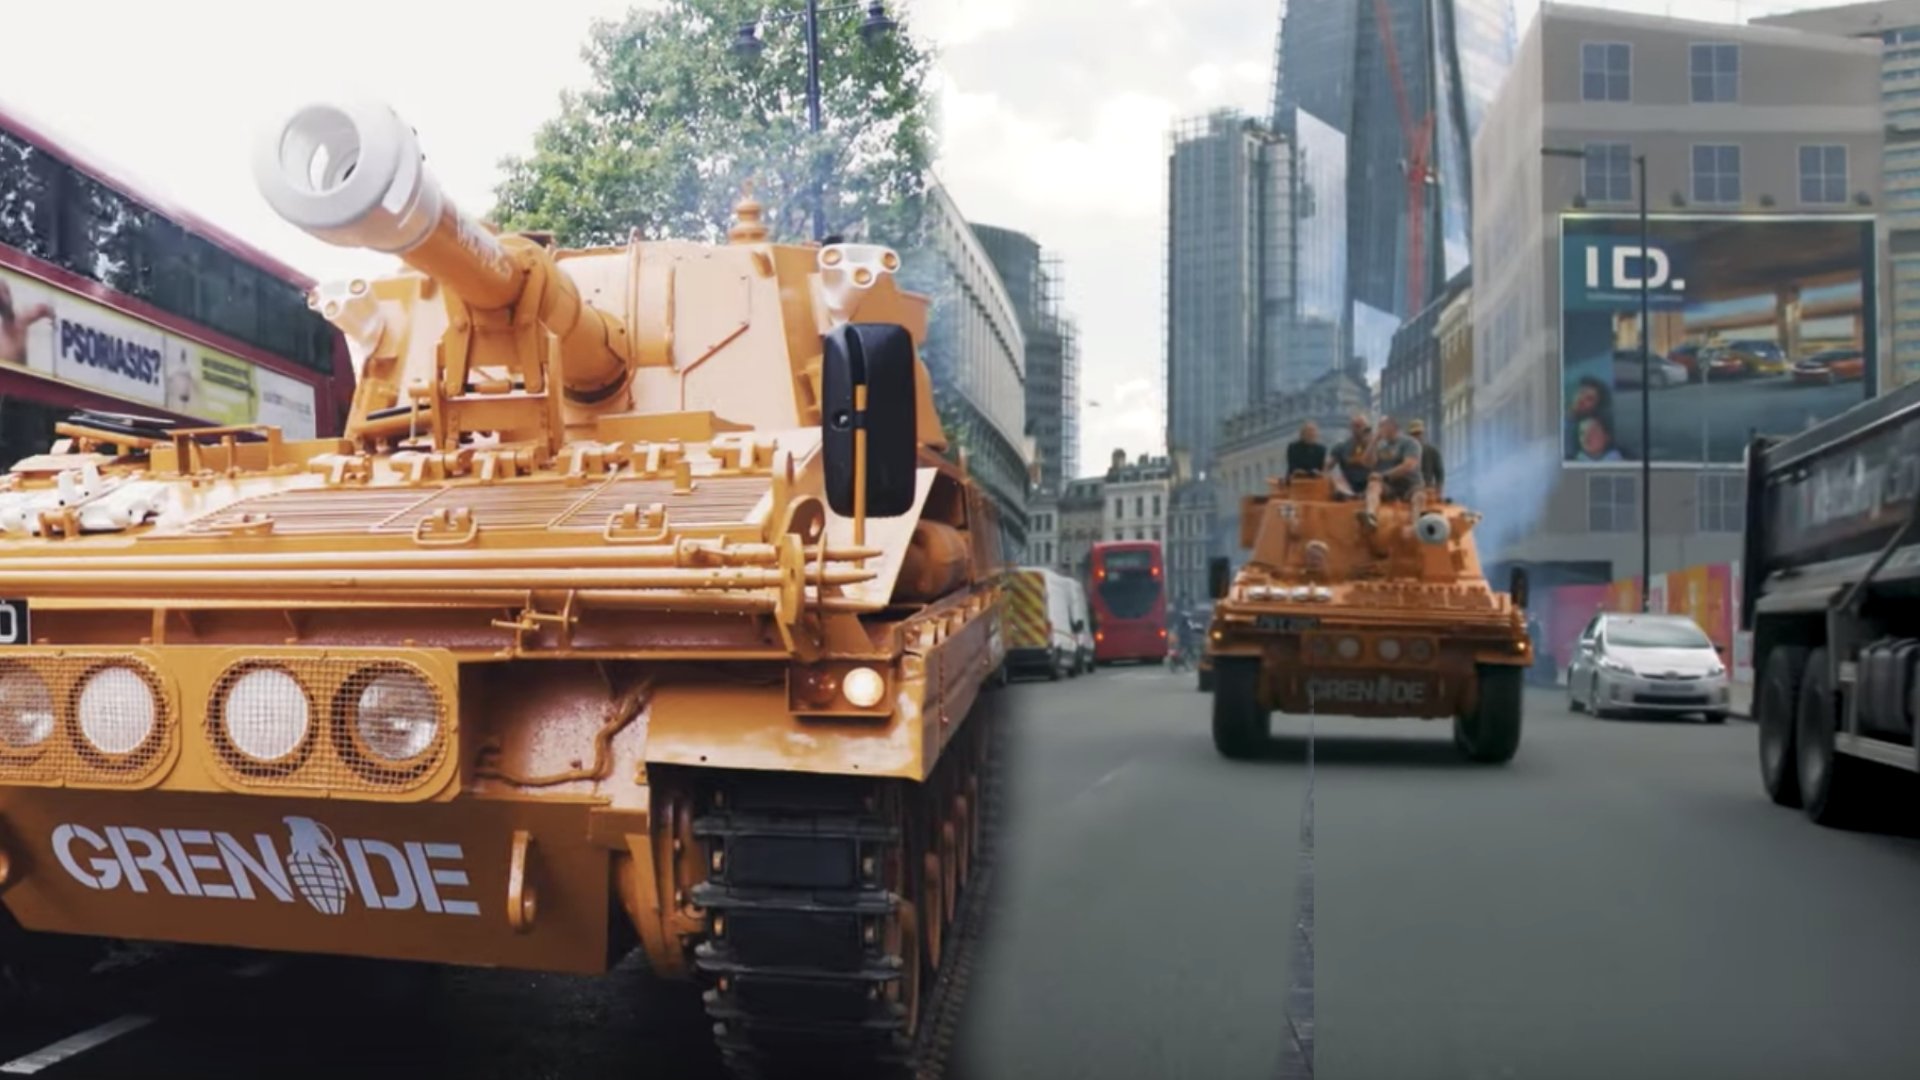 WATCH: James Haskell drives a tank around the streets of London